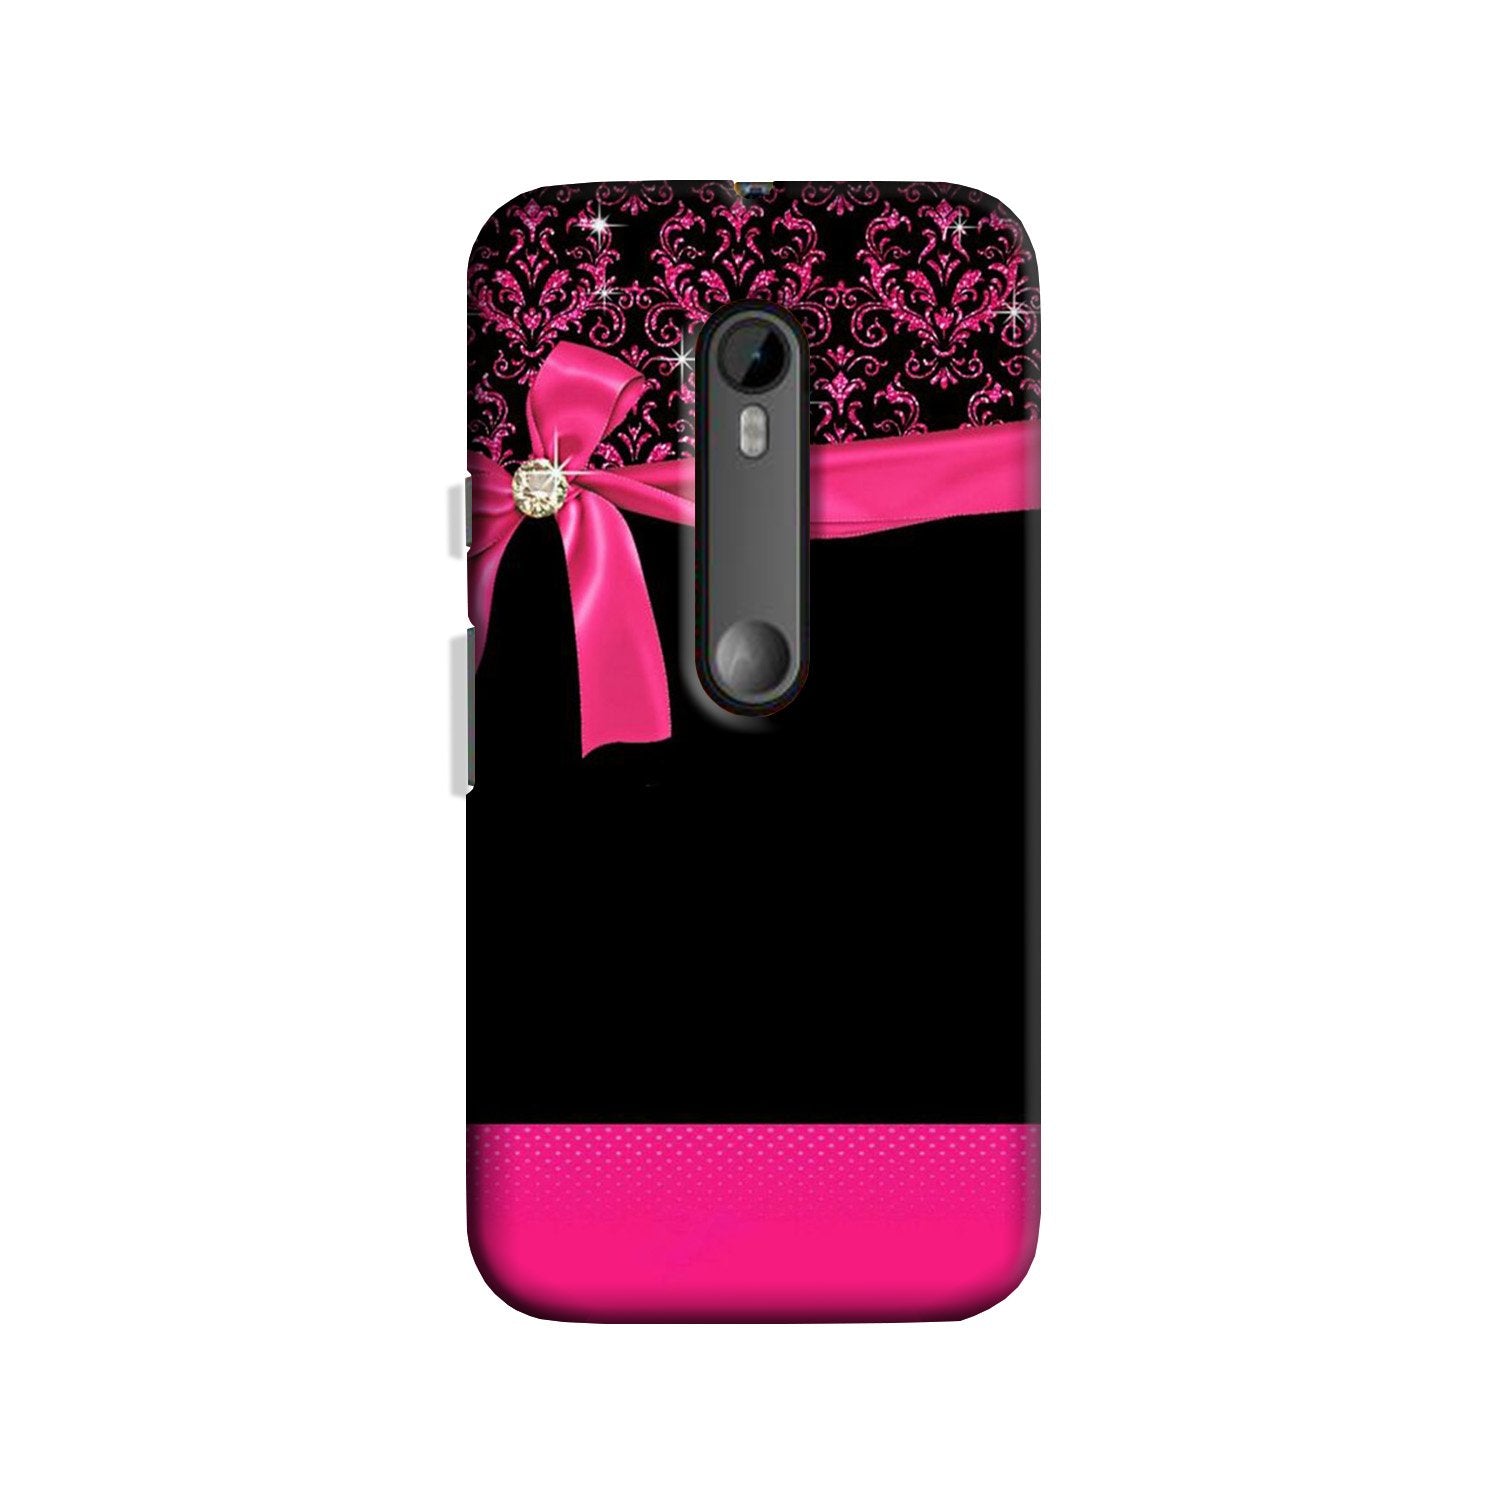 Gift Wrap4 Case for Moto X Style